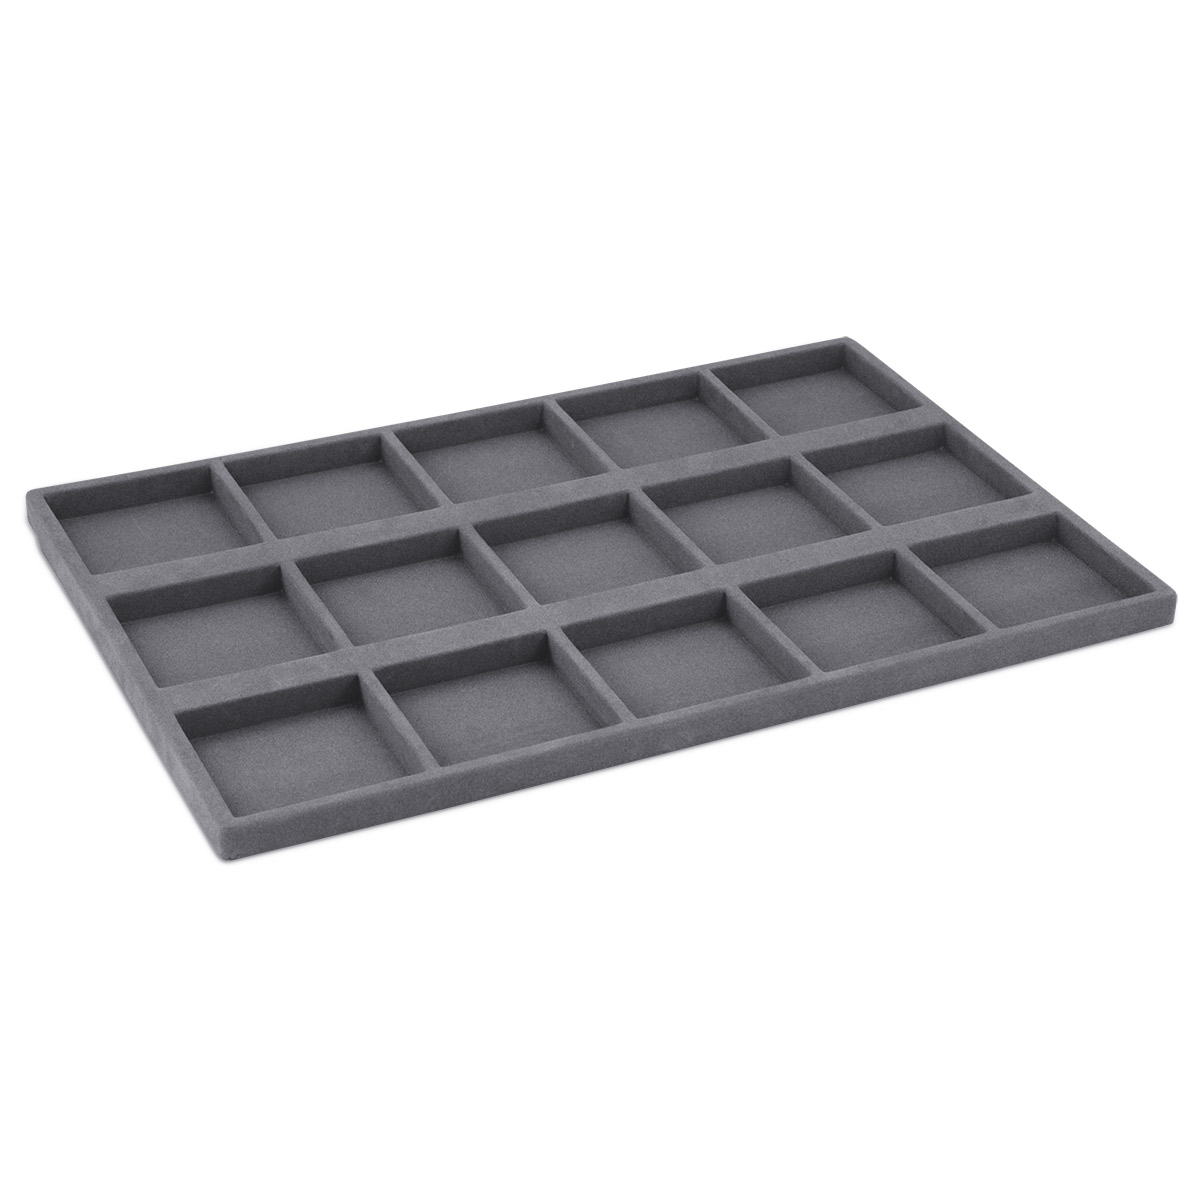 Inlay with 15 compartments, 80 x 80 mm, for tray N° 069002